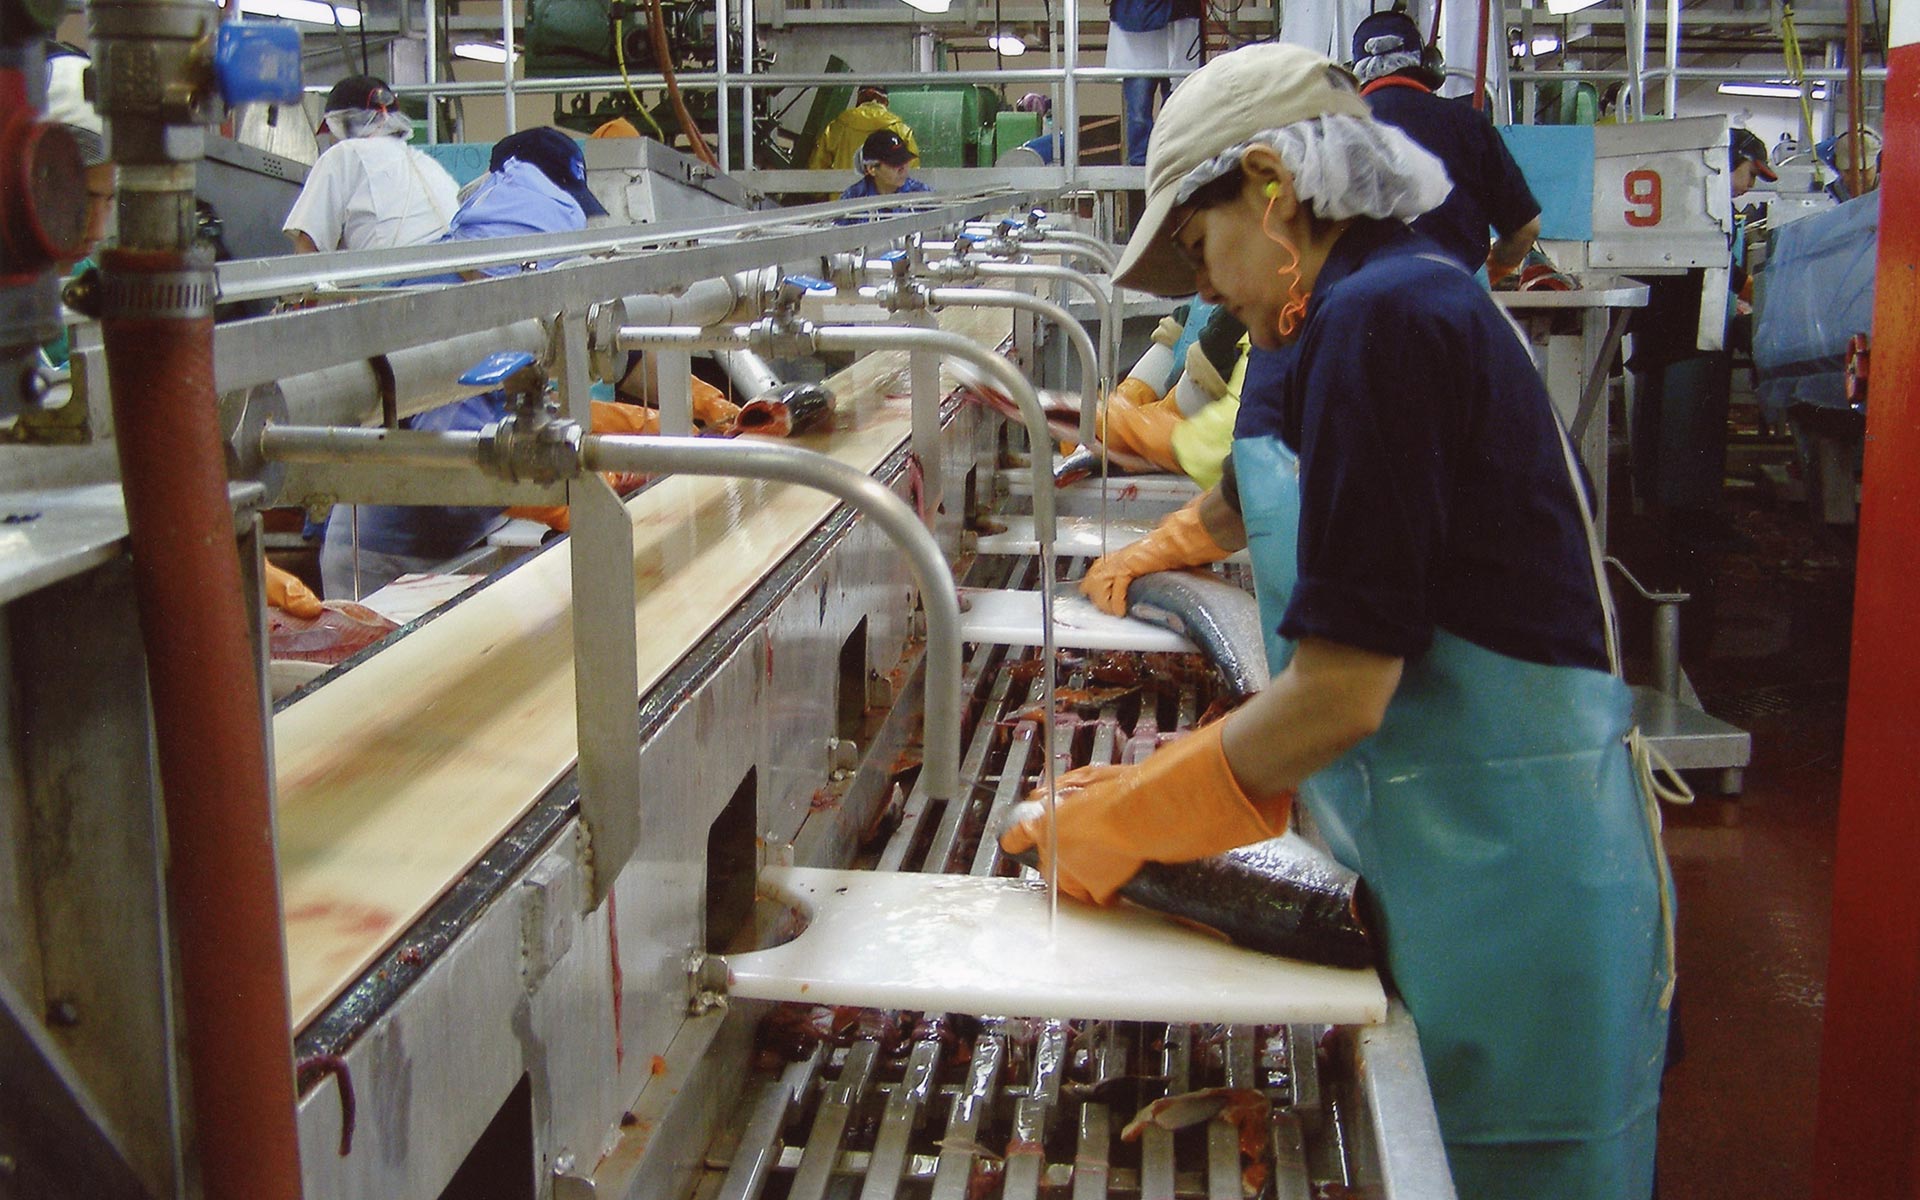 Several workers at stainless steel fish washing sinks wearing hair nets and hats, and rubber gloves and aprons.